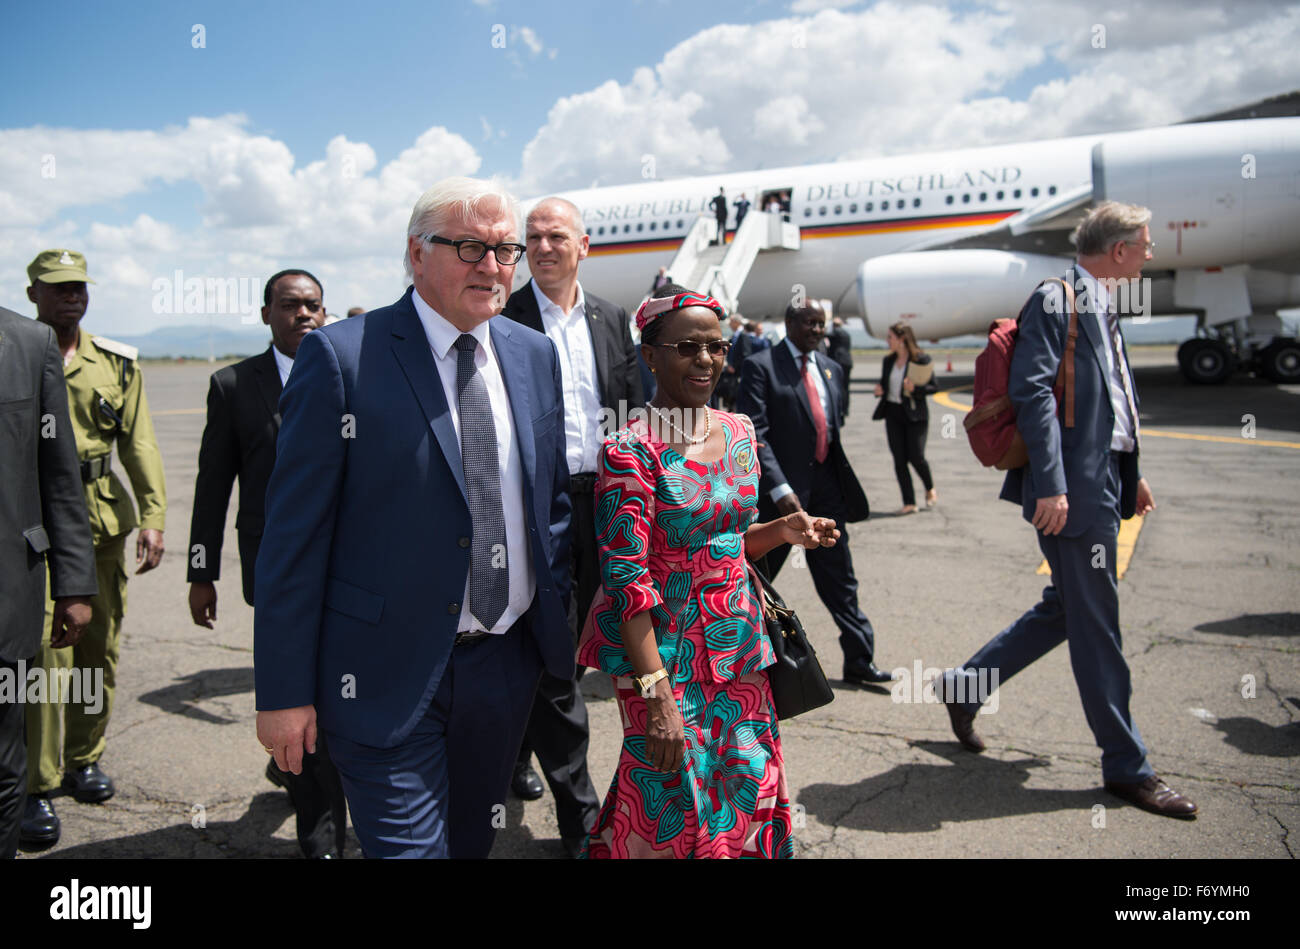 German Minister of Foreign Affairs Frank-Walter Steinmeier arrives to the airport in Arusha, Tanzania, 22 November 2015. Foreign Minister Steinmeier is visiting the four African states of Mozambique, Zambia, Uganda, and Tanzania with a cultural and economic delegation until Sunday, 22 November 2015. Photo: BERND VON JUTRCZENKA/dpa Stock Photo